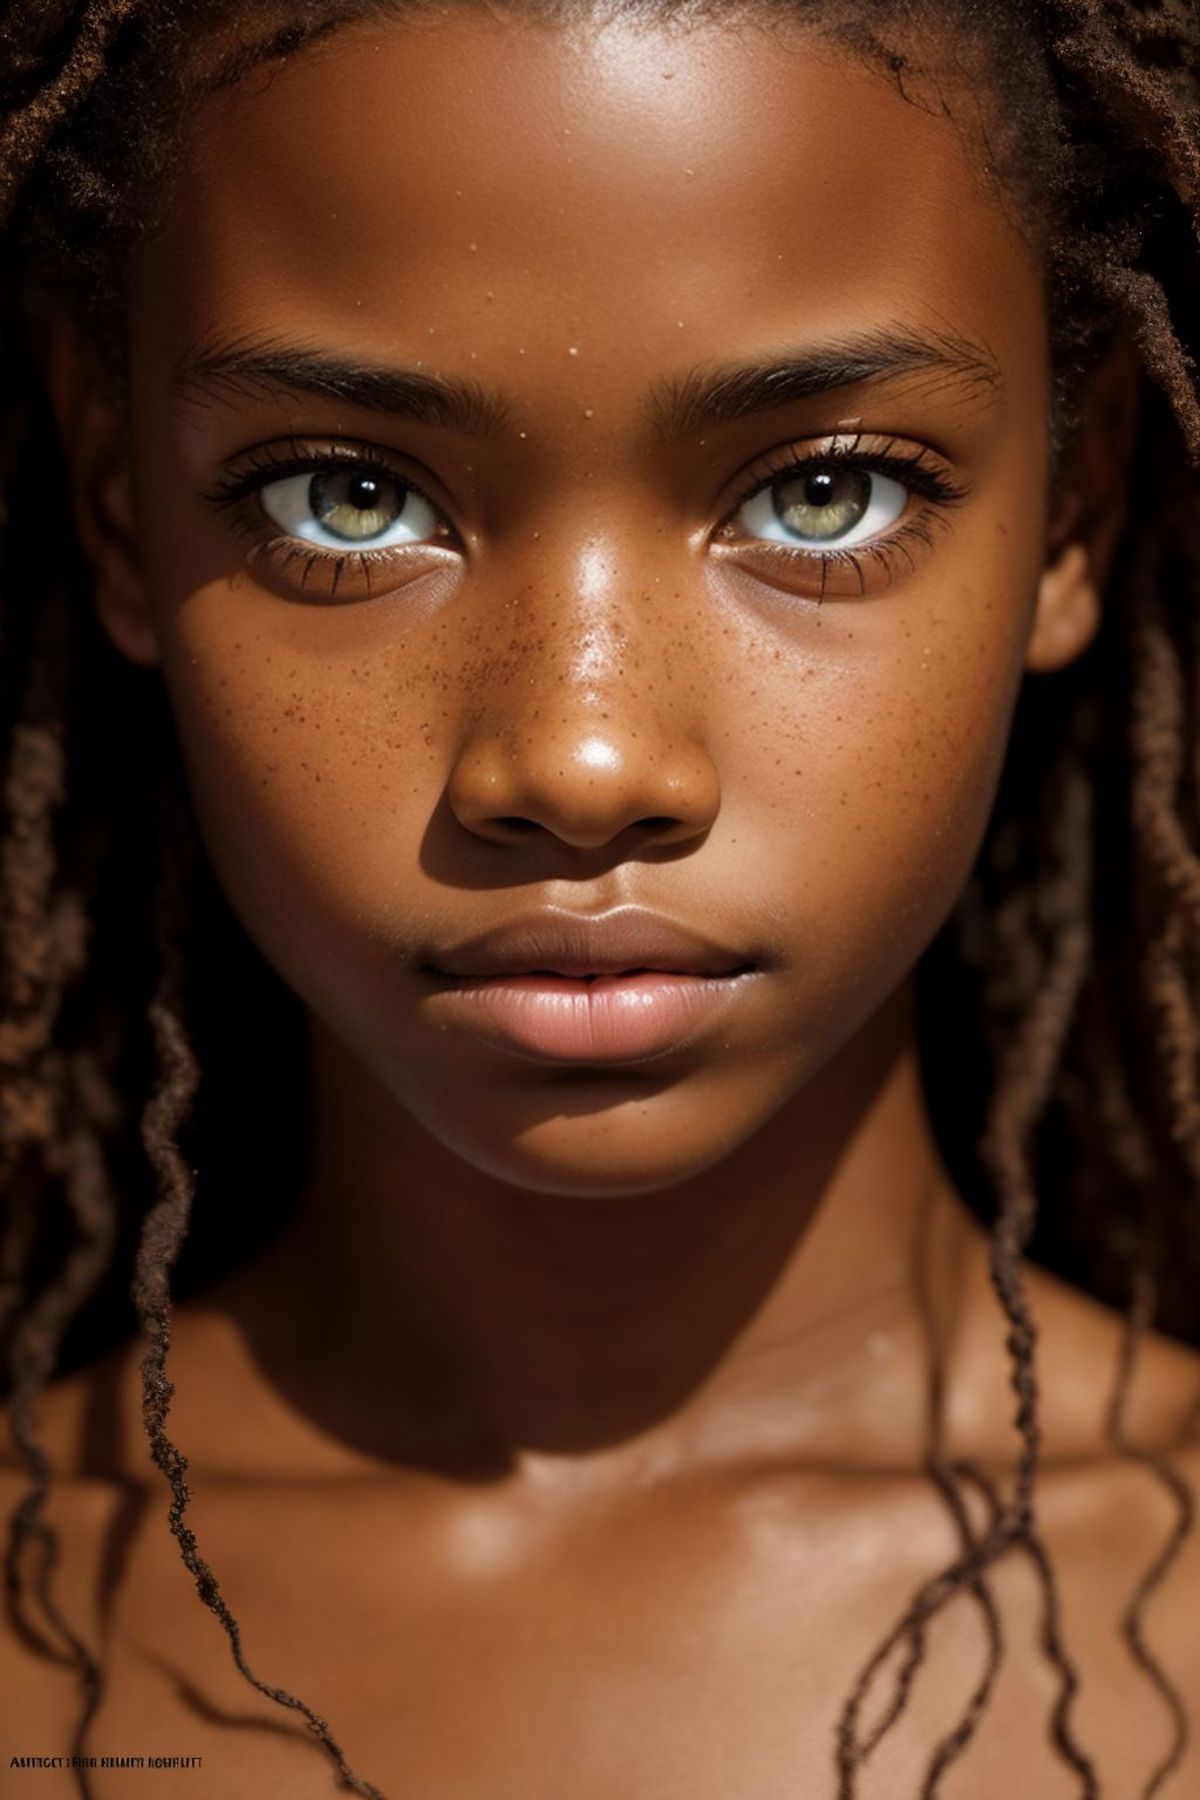 A close-up of a young girl with a prominent nose and green eyes.